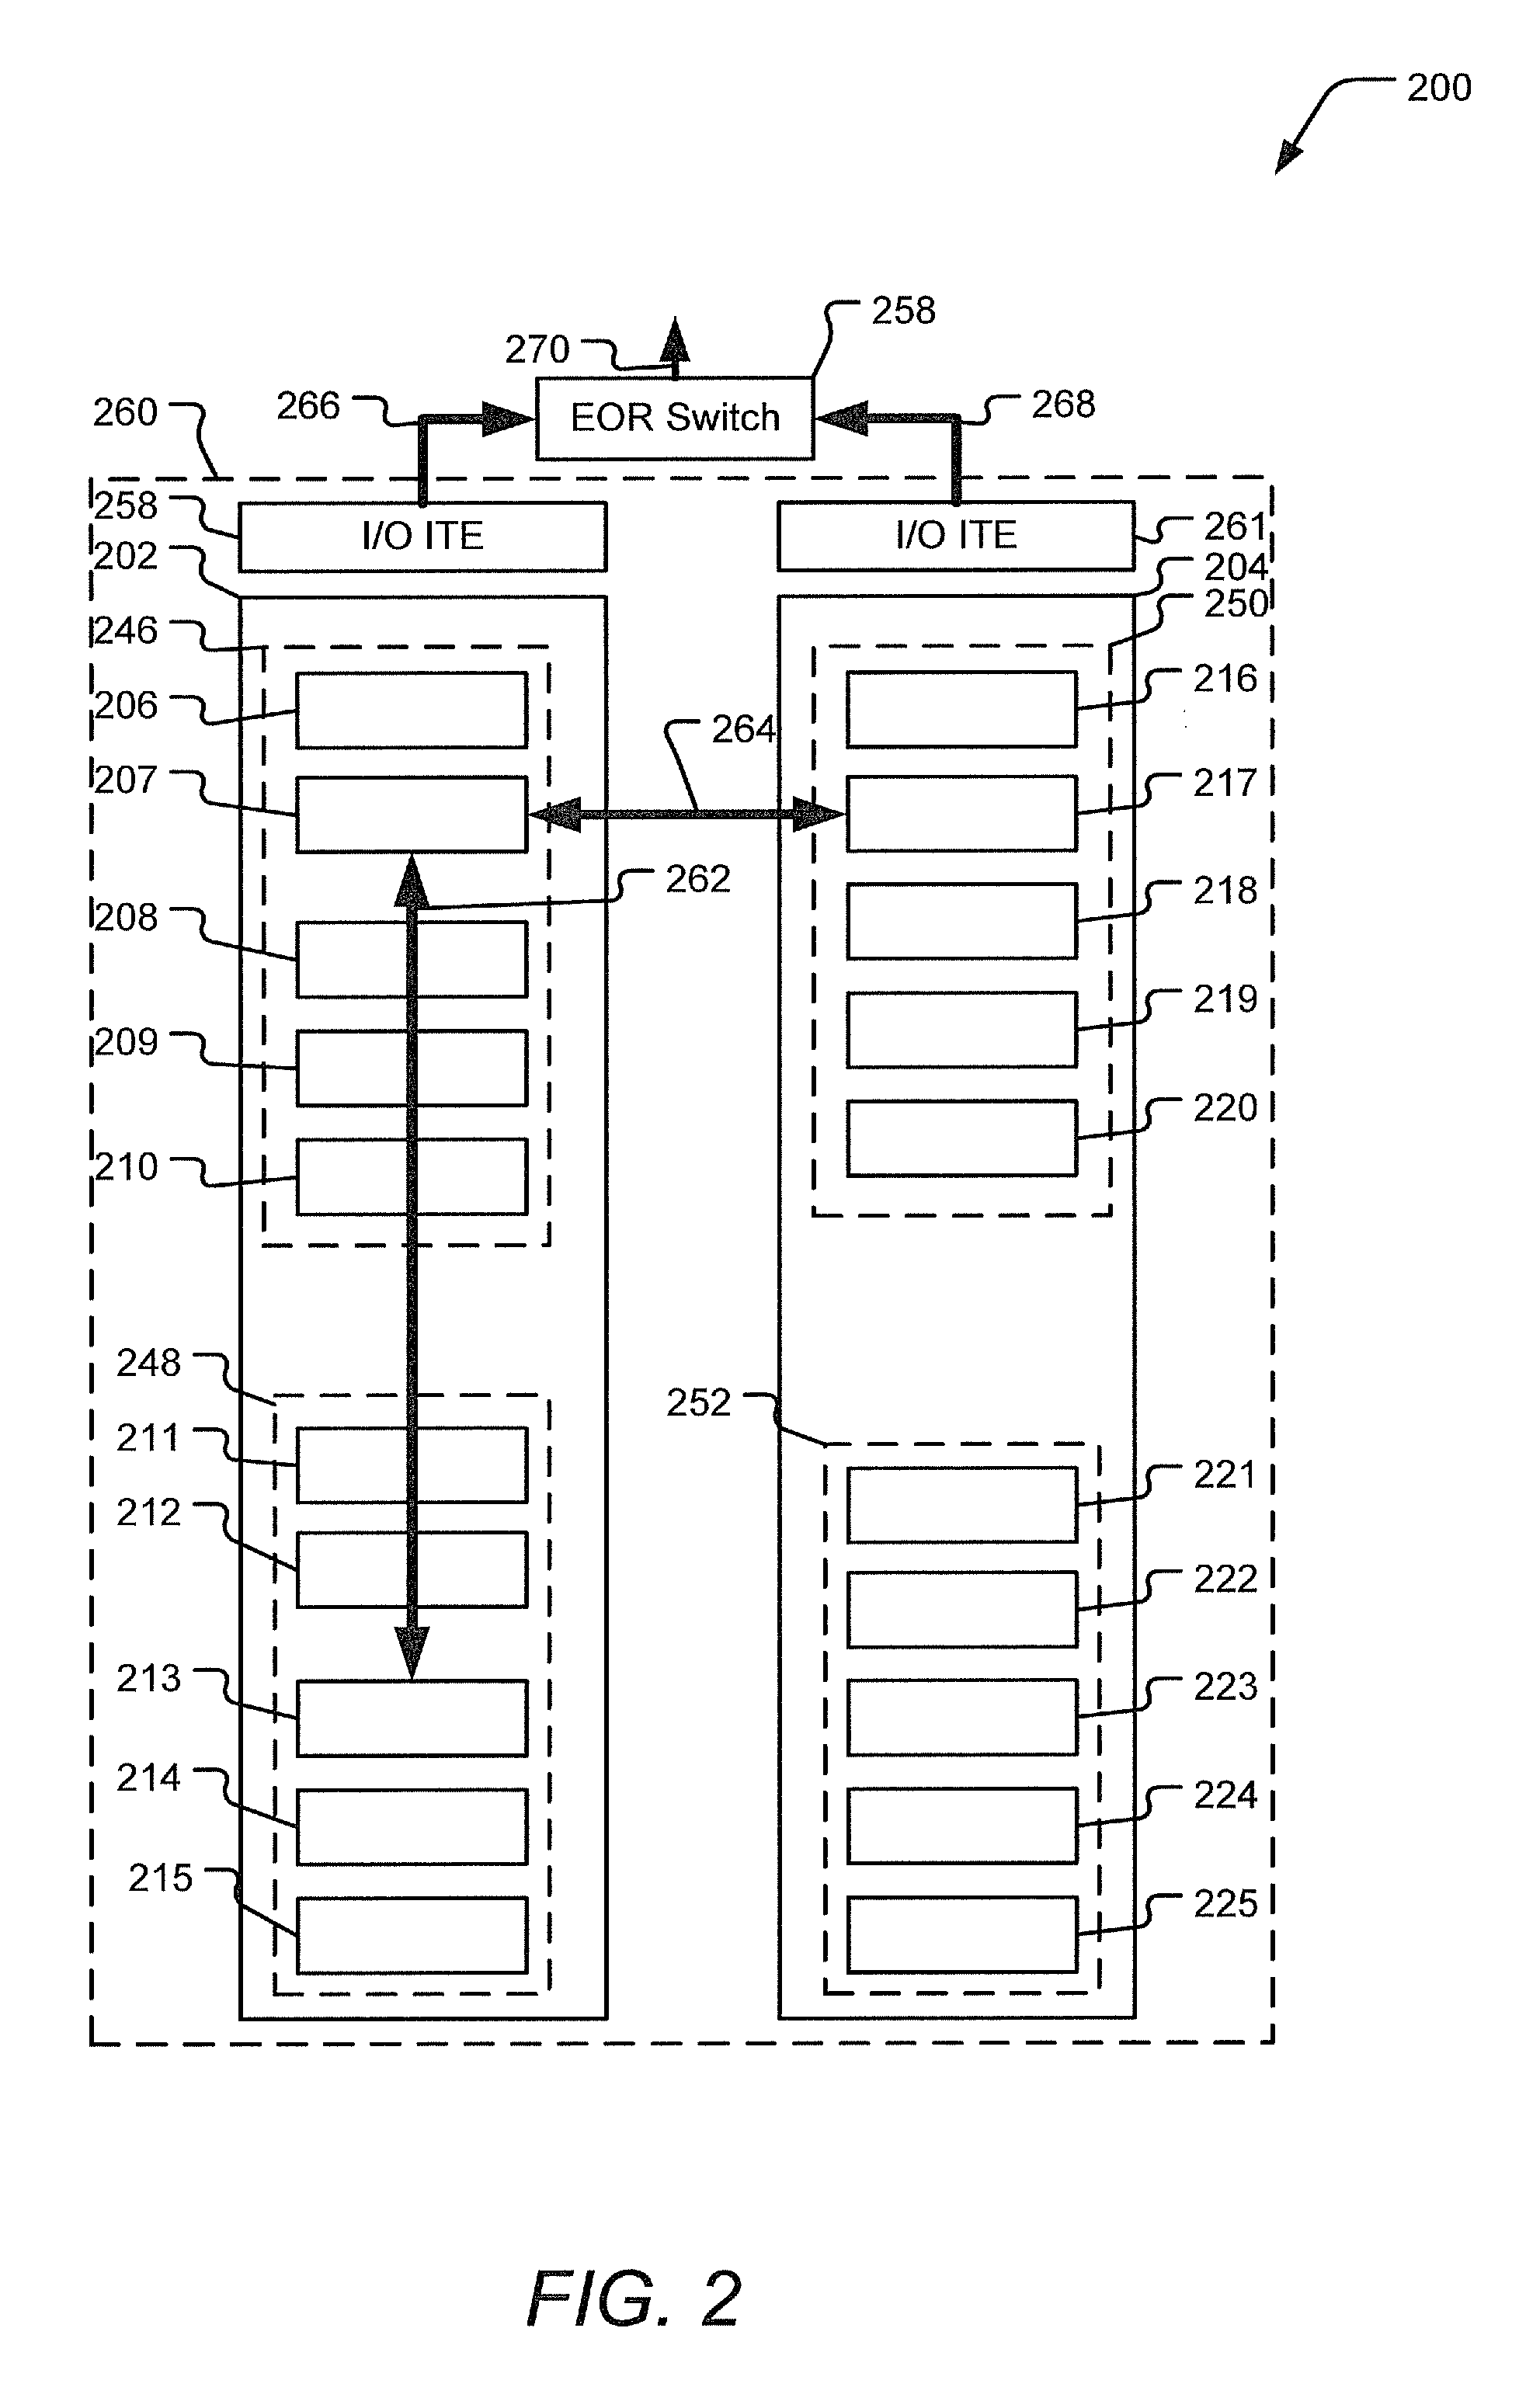 Priority Based Flow Control Within a Virtual Distributed Bridge Environment